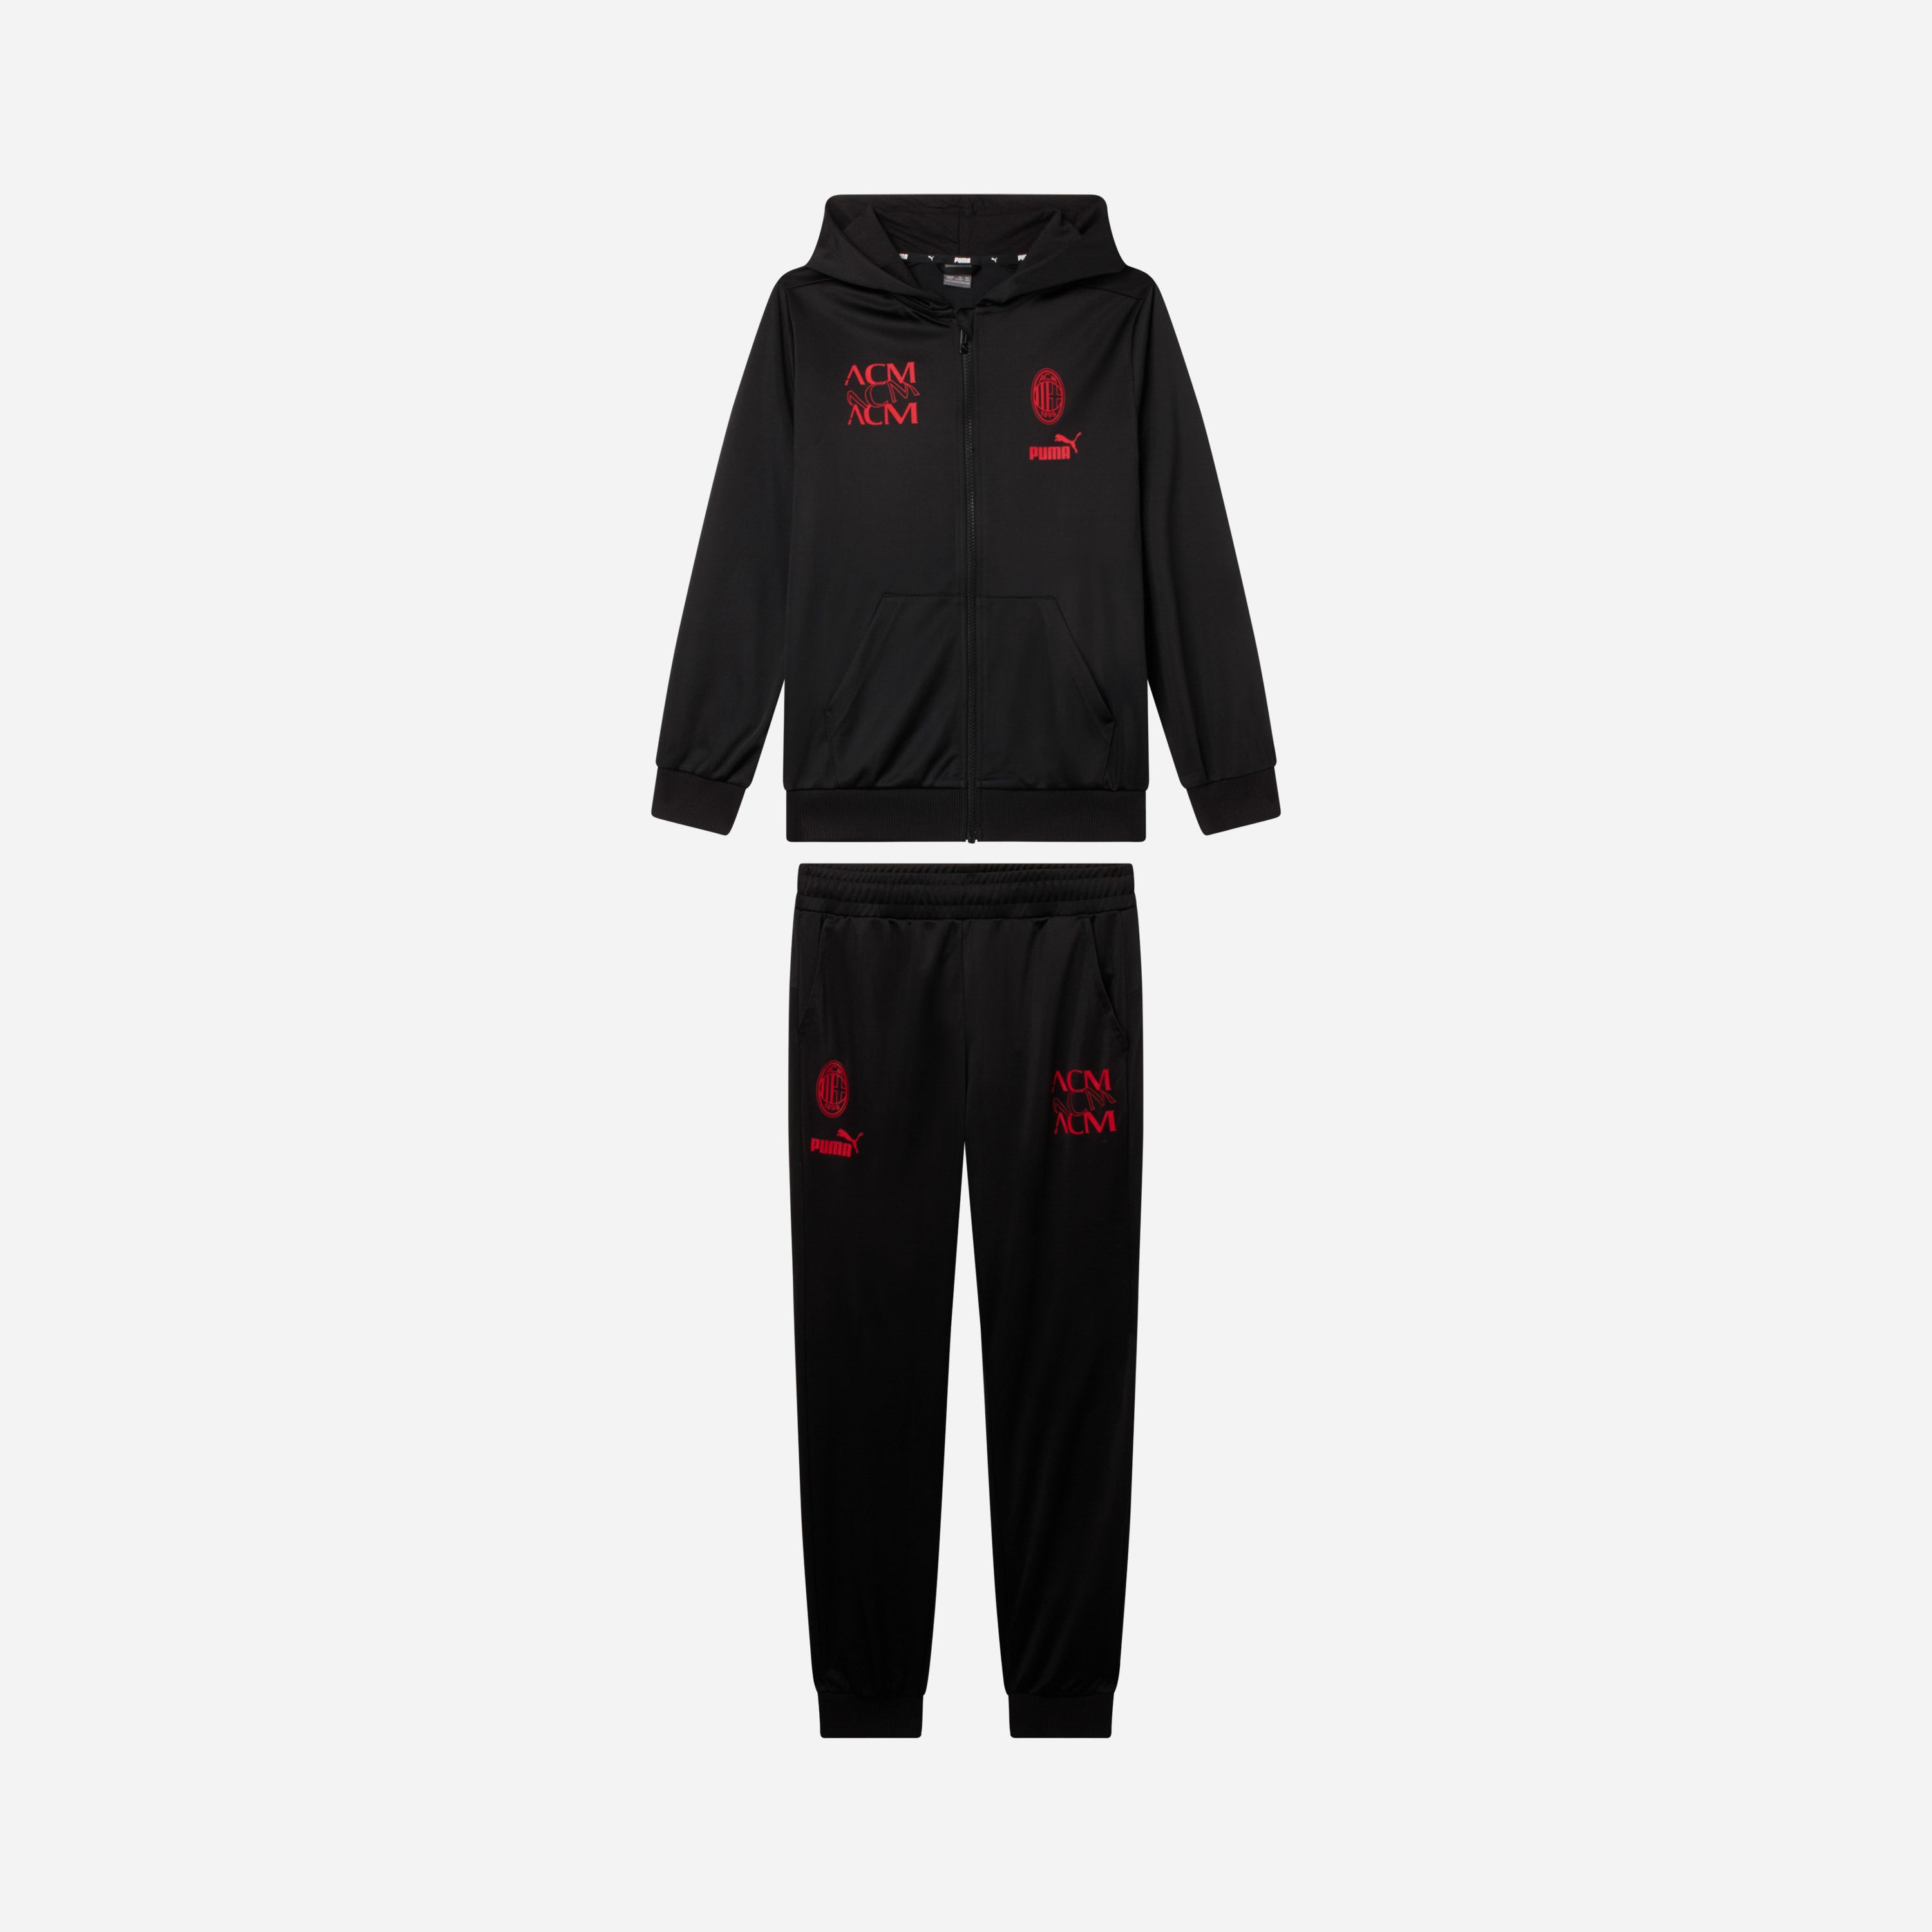 AC Milan Soccer Tracksuit Italy Football Presentation Suit NEW KIDS 152